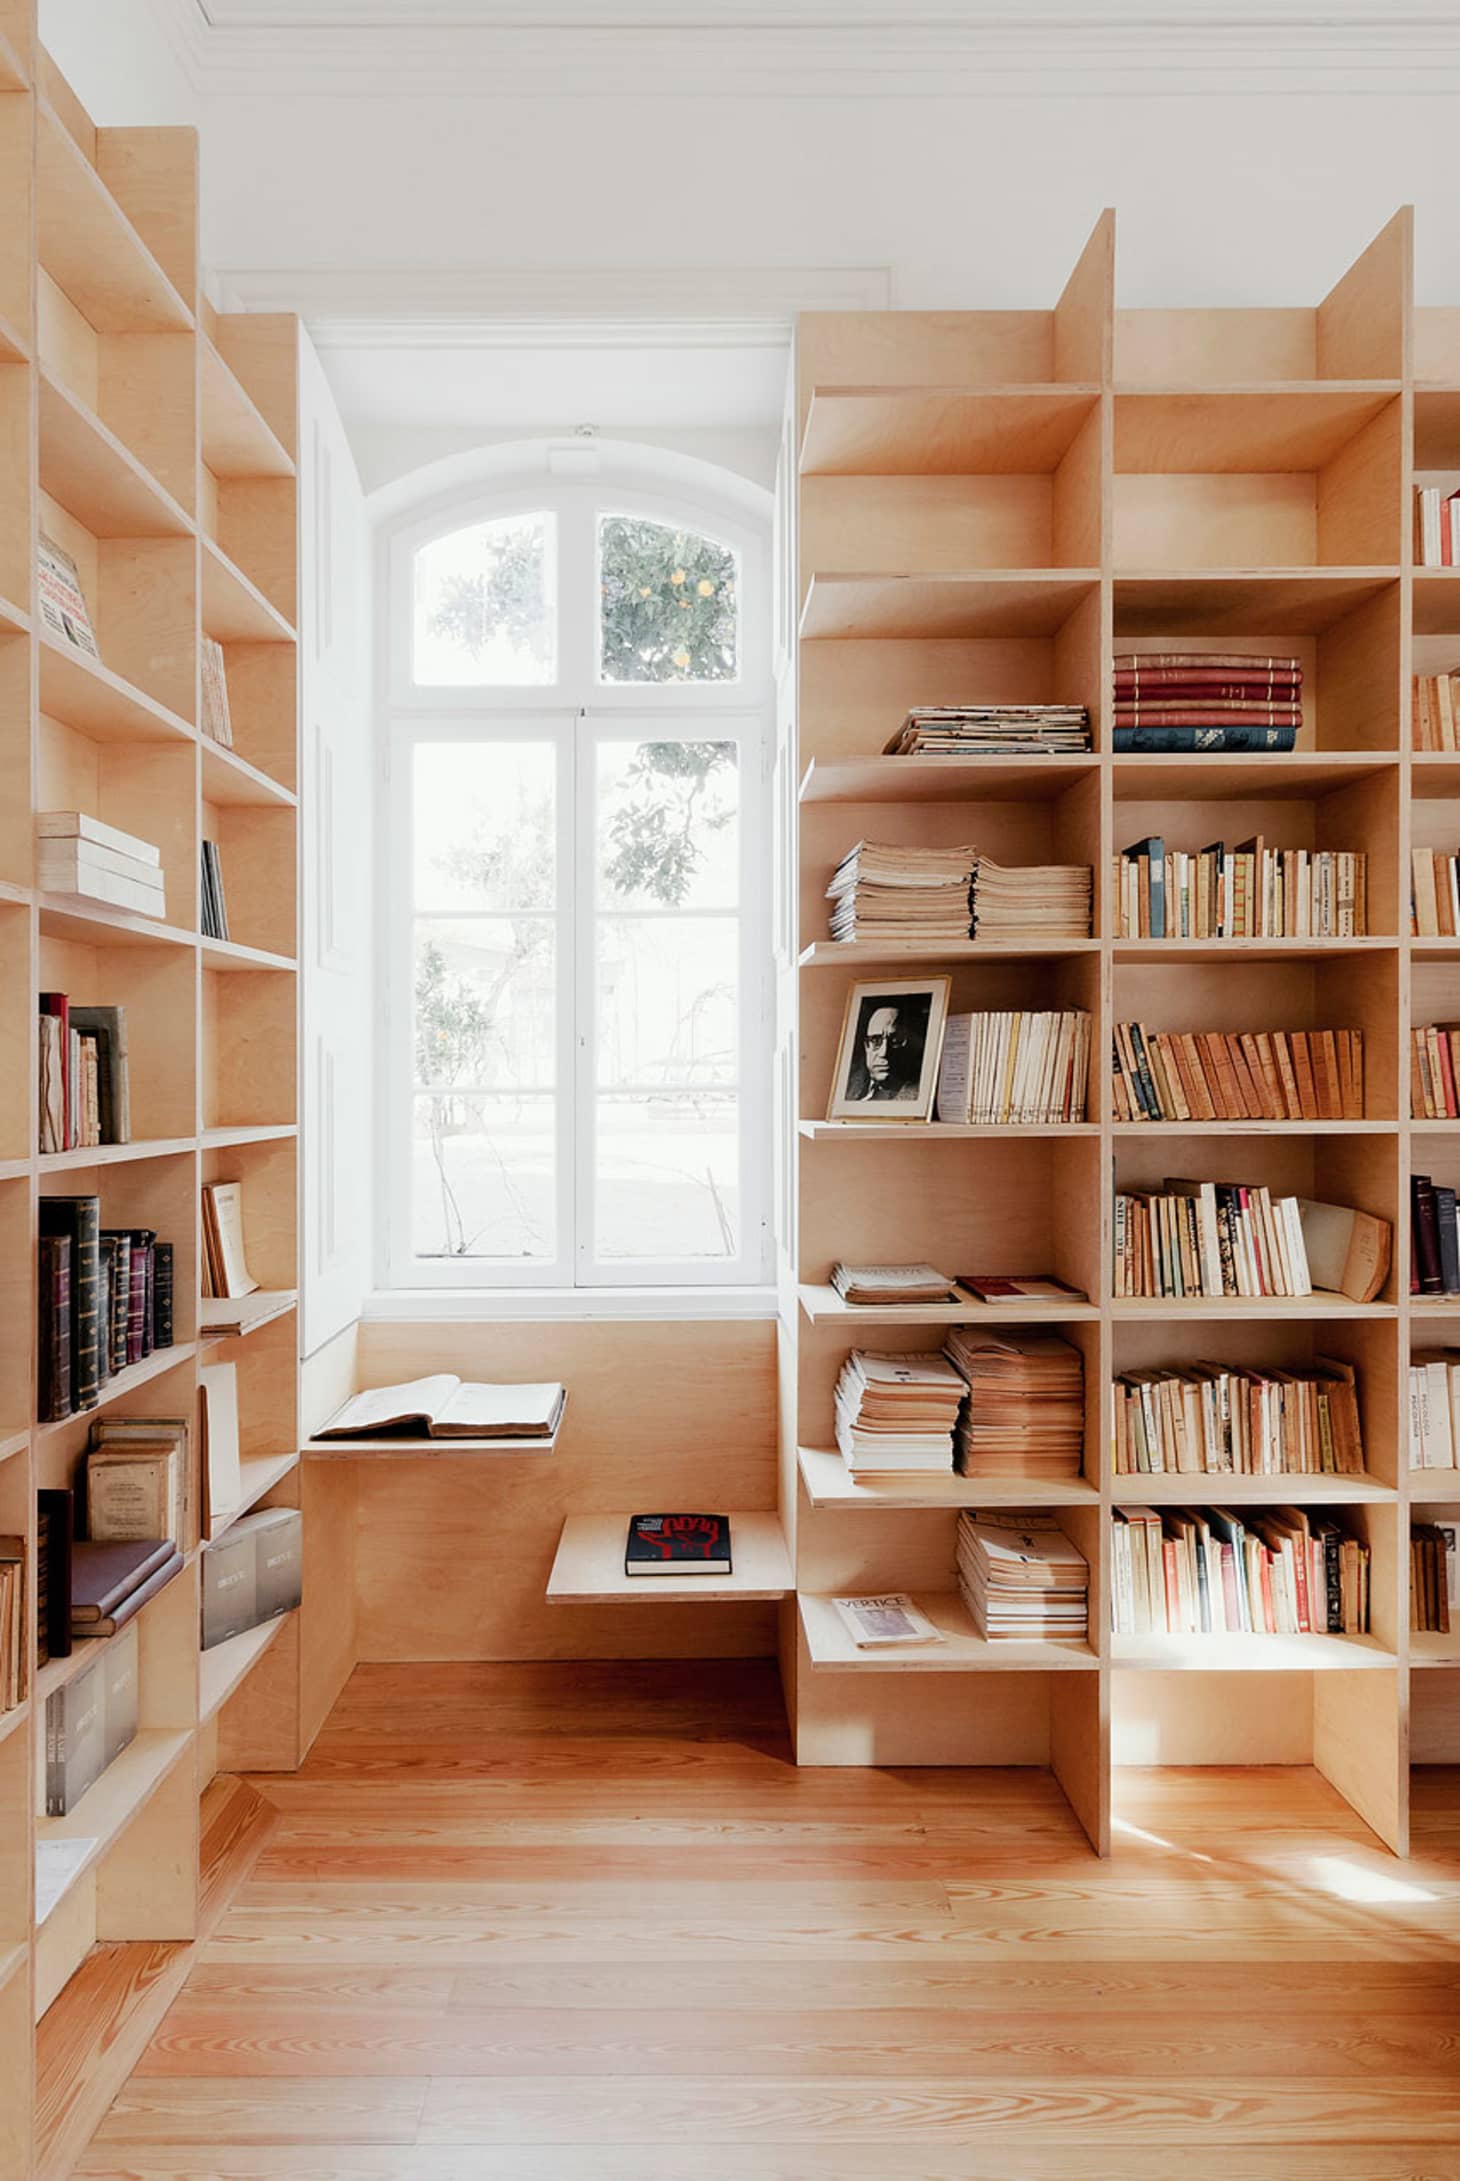 Creatice Built In Bookshelves for Large Space